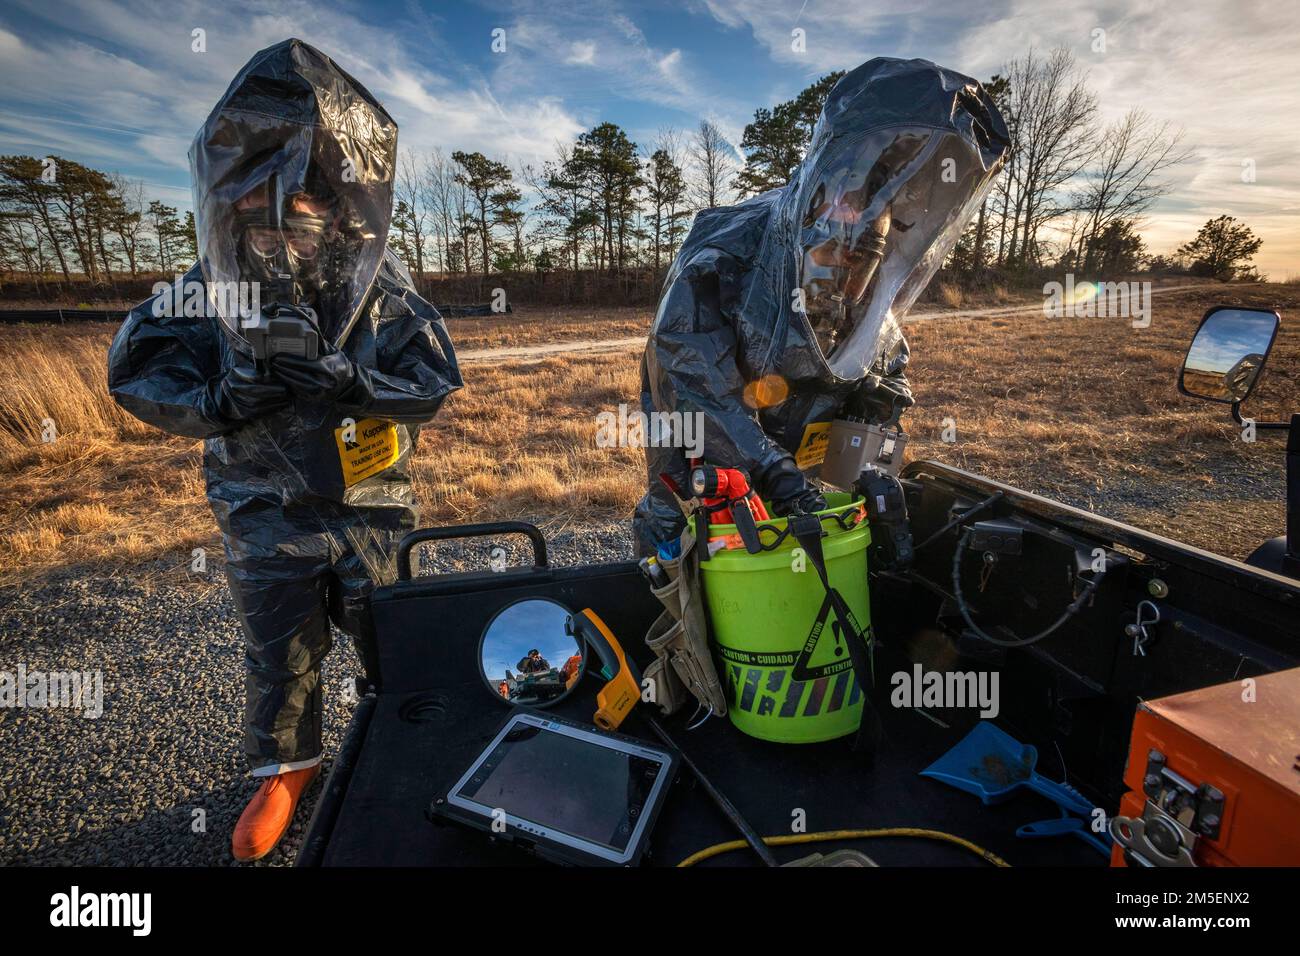 U.S. Army Sgt. Eric Boyer, left, and Staff Sgt. Nicky Lam, both survey team members with the 21st Weapons of Mass Destruction-Civil Support Team (21st WMD-CST), New Jersey National Guard, prepare to enter a simulated crime scene during an Army North training exercise at the William J. Hughes Technical Center, Federal Aviation Administration, Egg Harbor Township, New Jersey, March 3, 2022. The 21st identifies chemical, biological, radiological, and nuclear substances; assesses and advises civil authorities on response measures to man-made or natural disasters. (New Jersey National Guard photo b Stock Photo